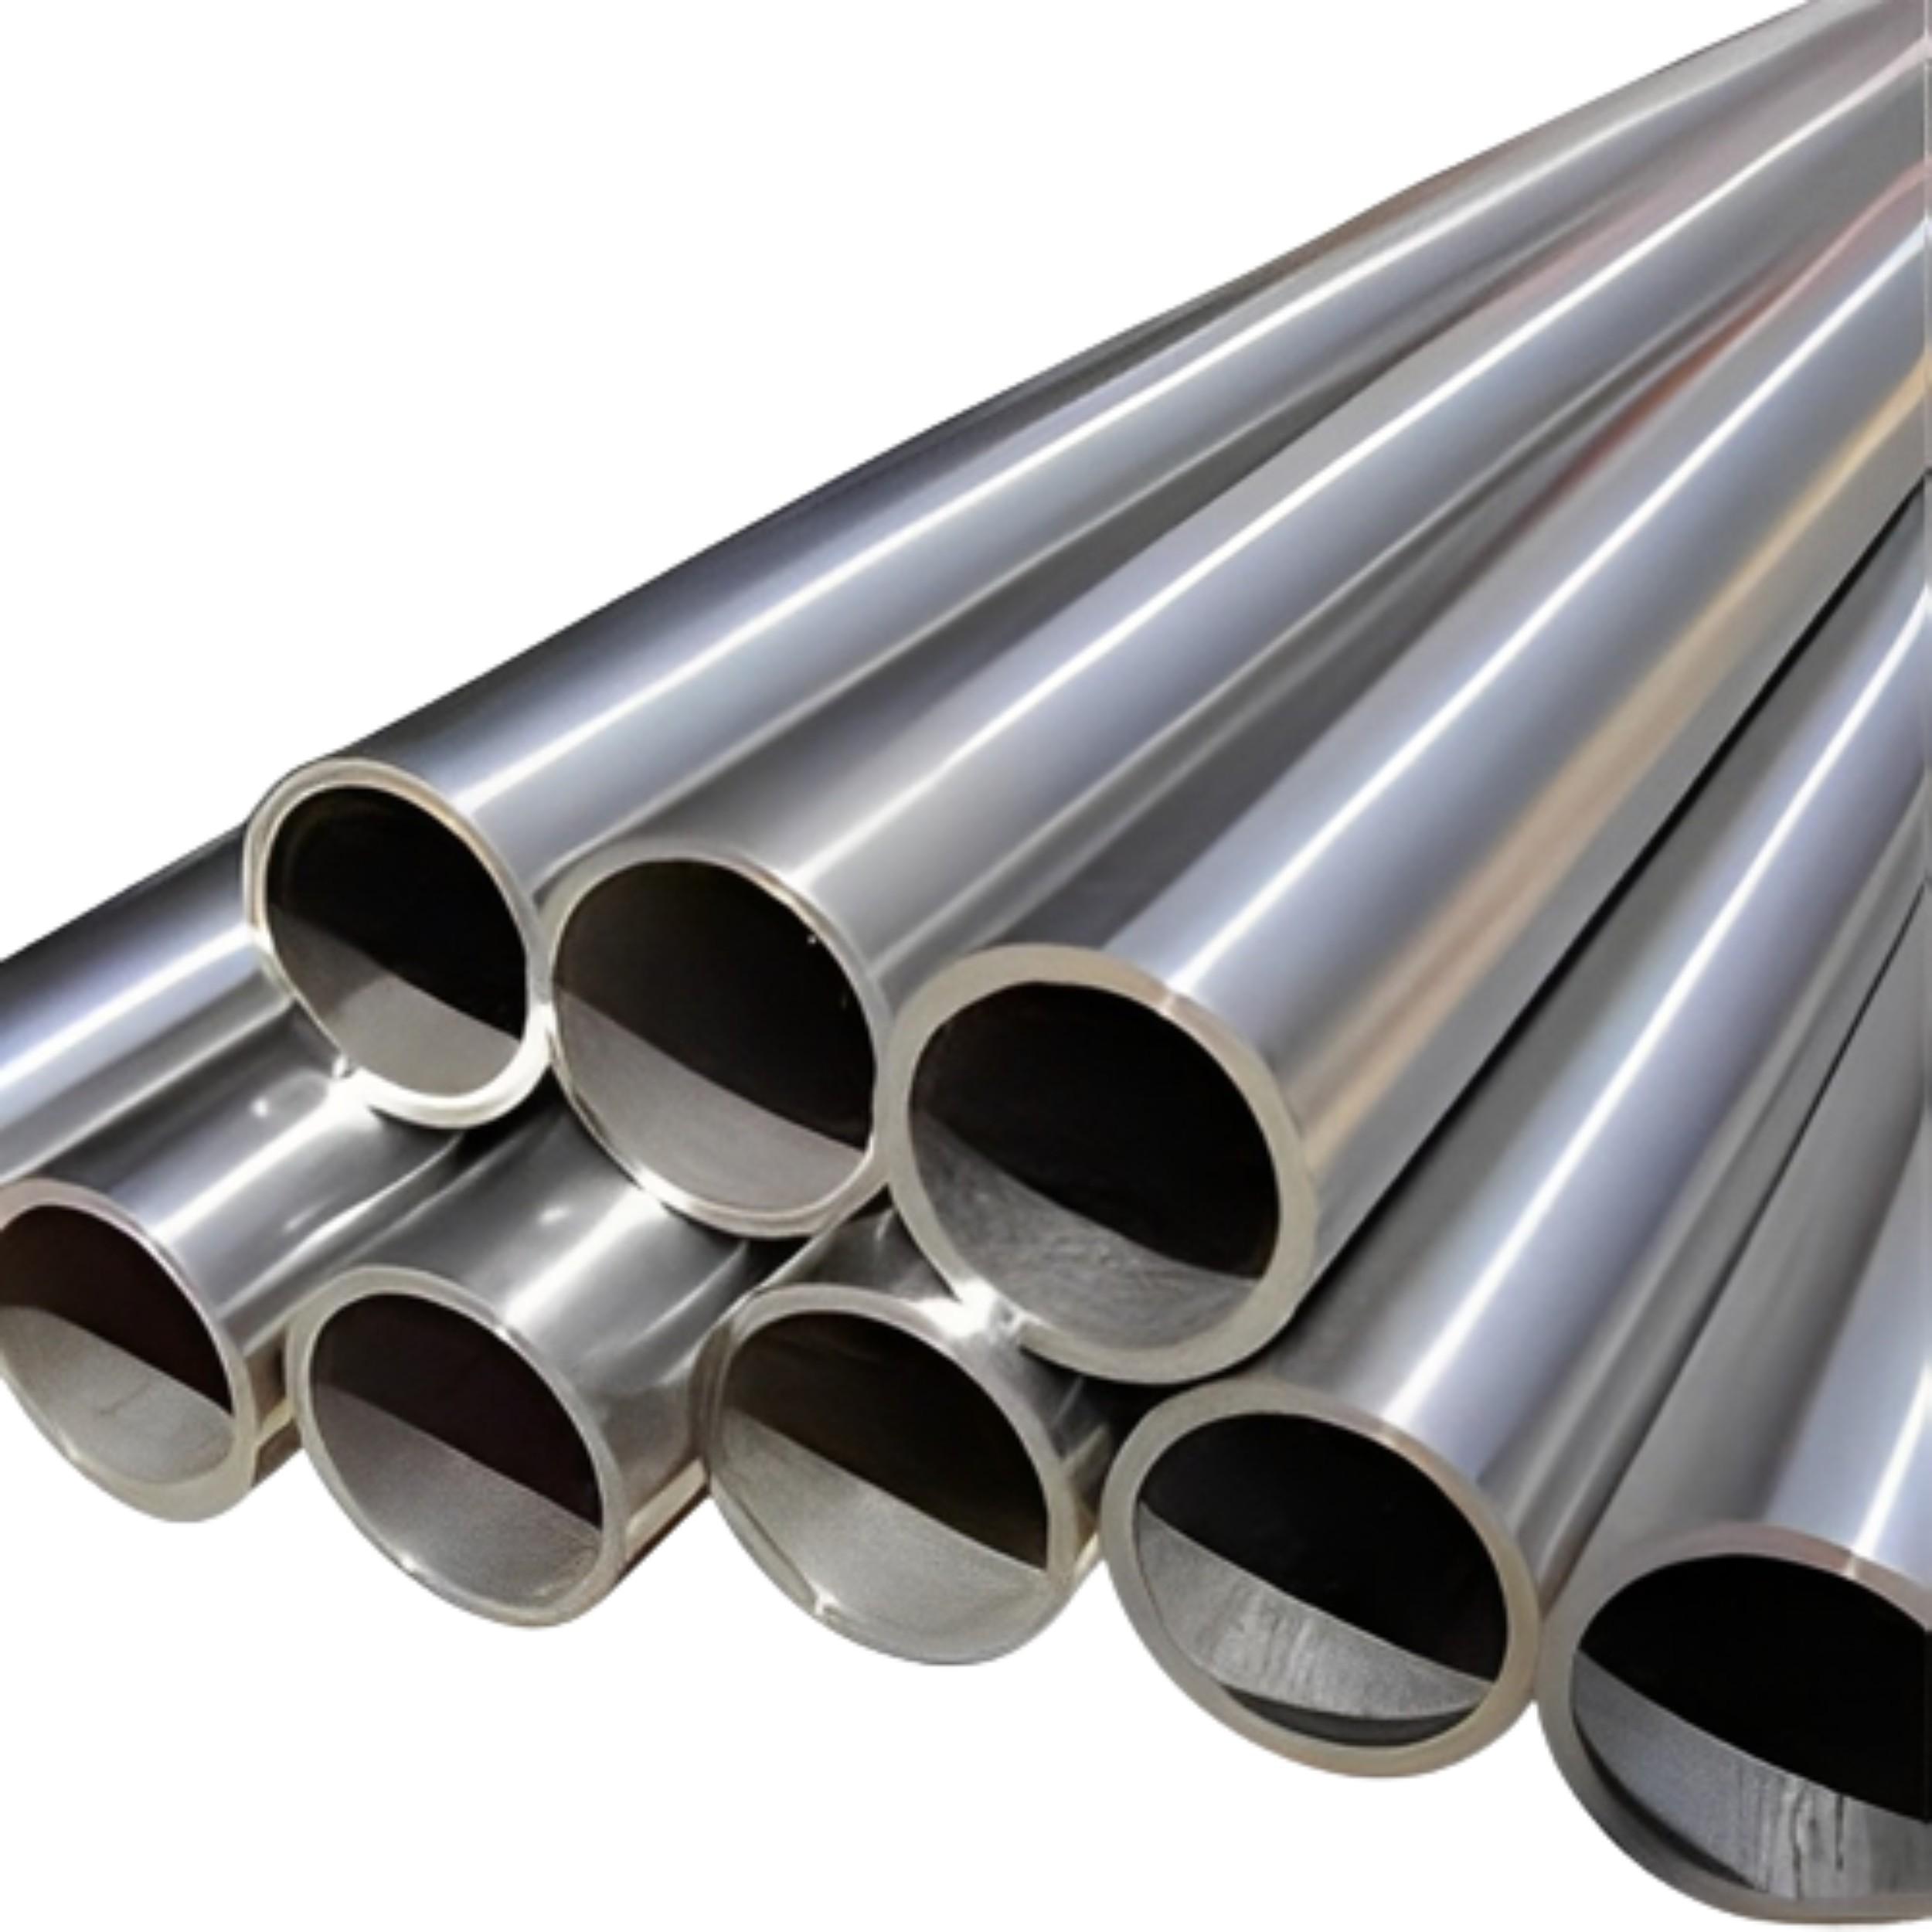 8 mm Jindal Panther Mild Steel Bars at Rs 65000/tonne in Nagpur | ID:  20269159397